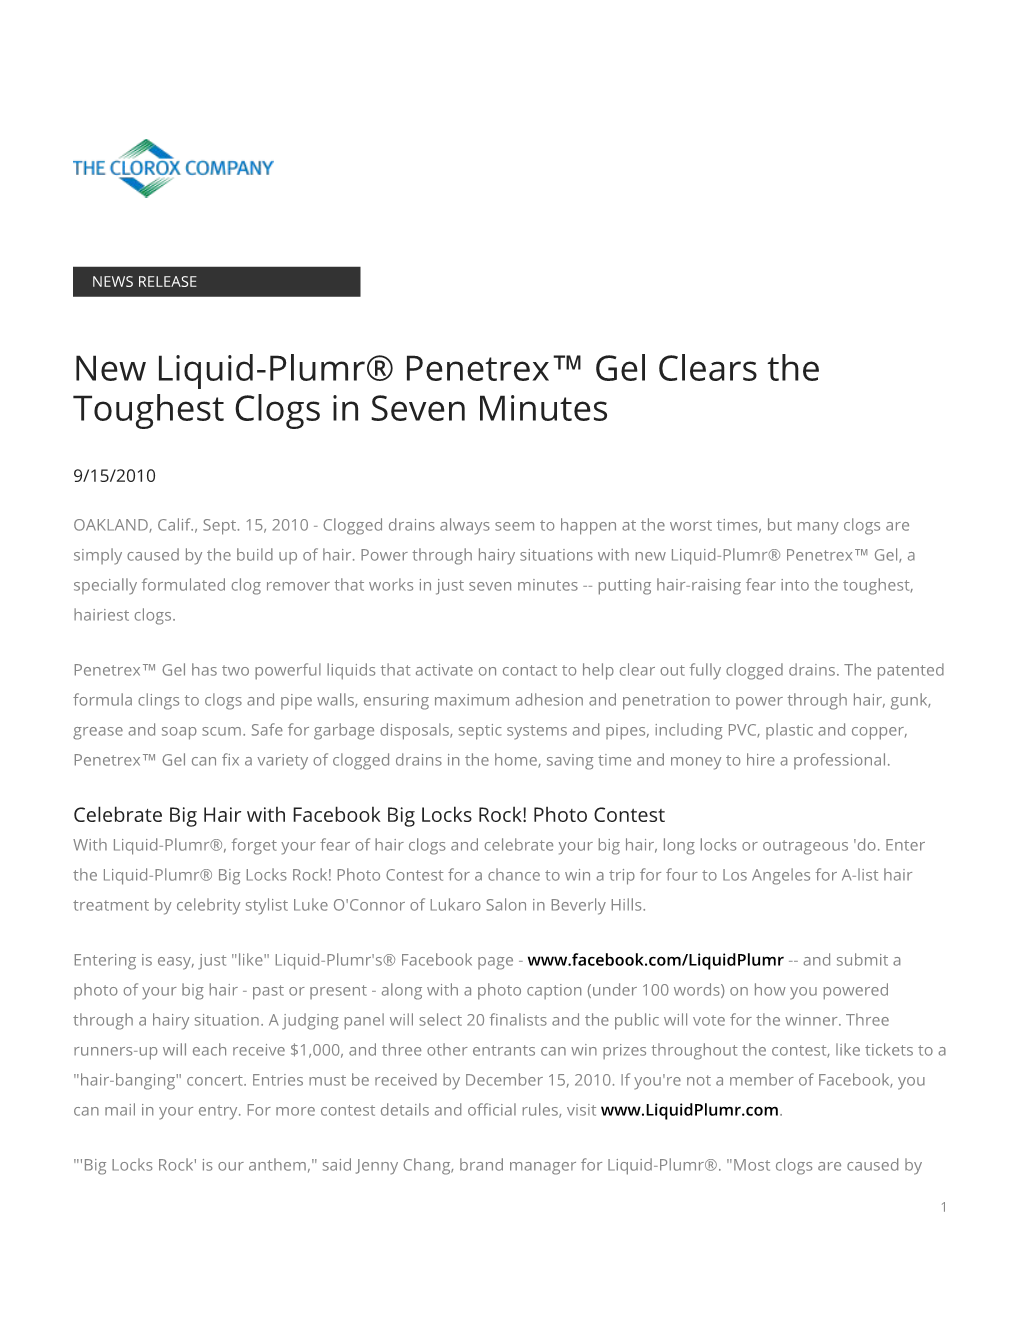 New Liquid-Plumr® Penetrex™ Gel Clears the Toughest Clogs in Seven Minutes